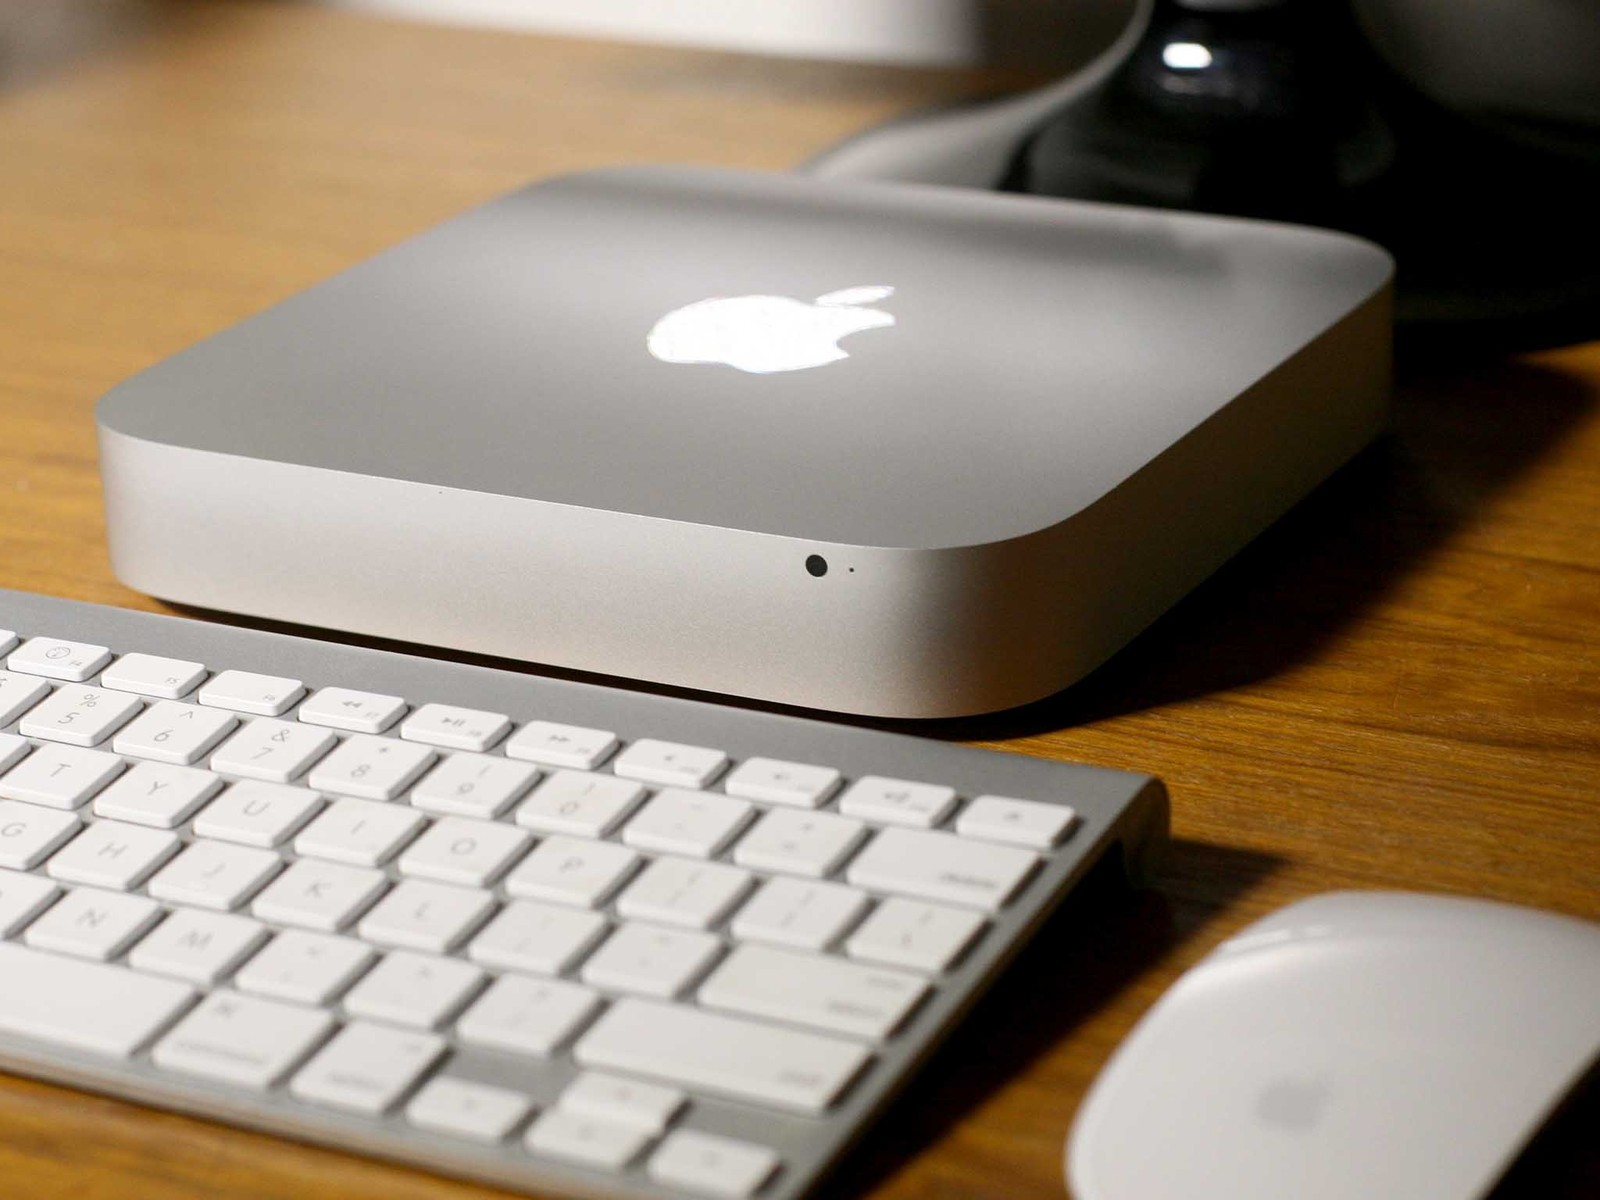 Apple Mac Mini: just how committed is Apple about a 2017 refresh?